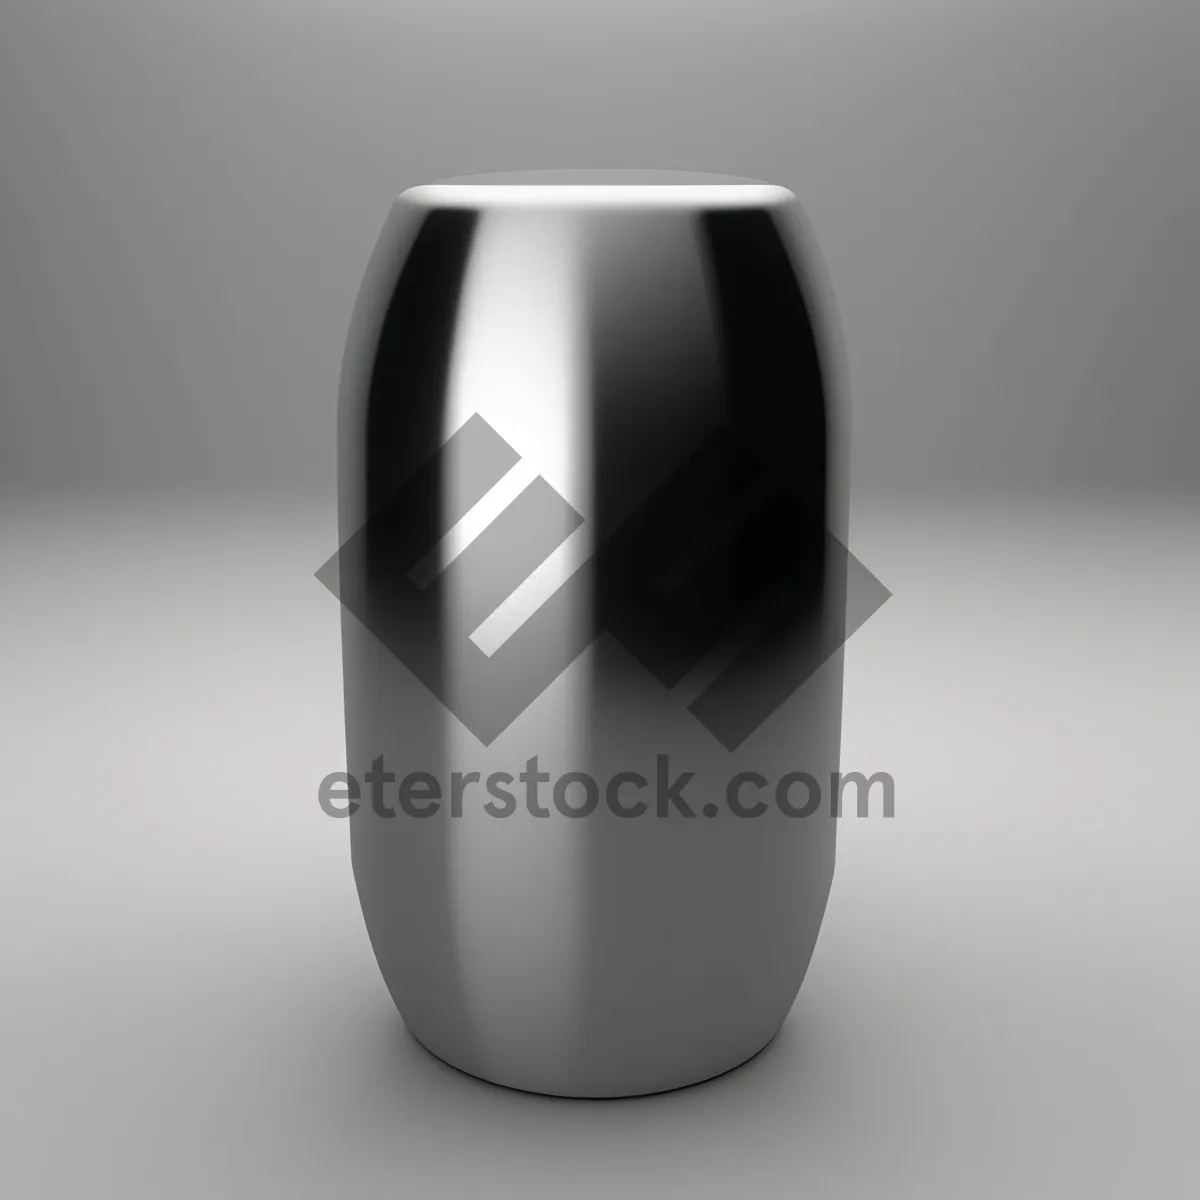 Picture of Transparent Glass Vase with Liquid Fill - 3D Render